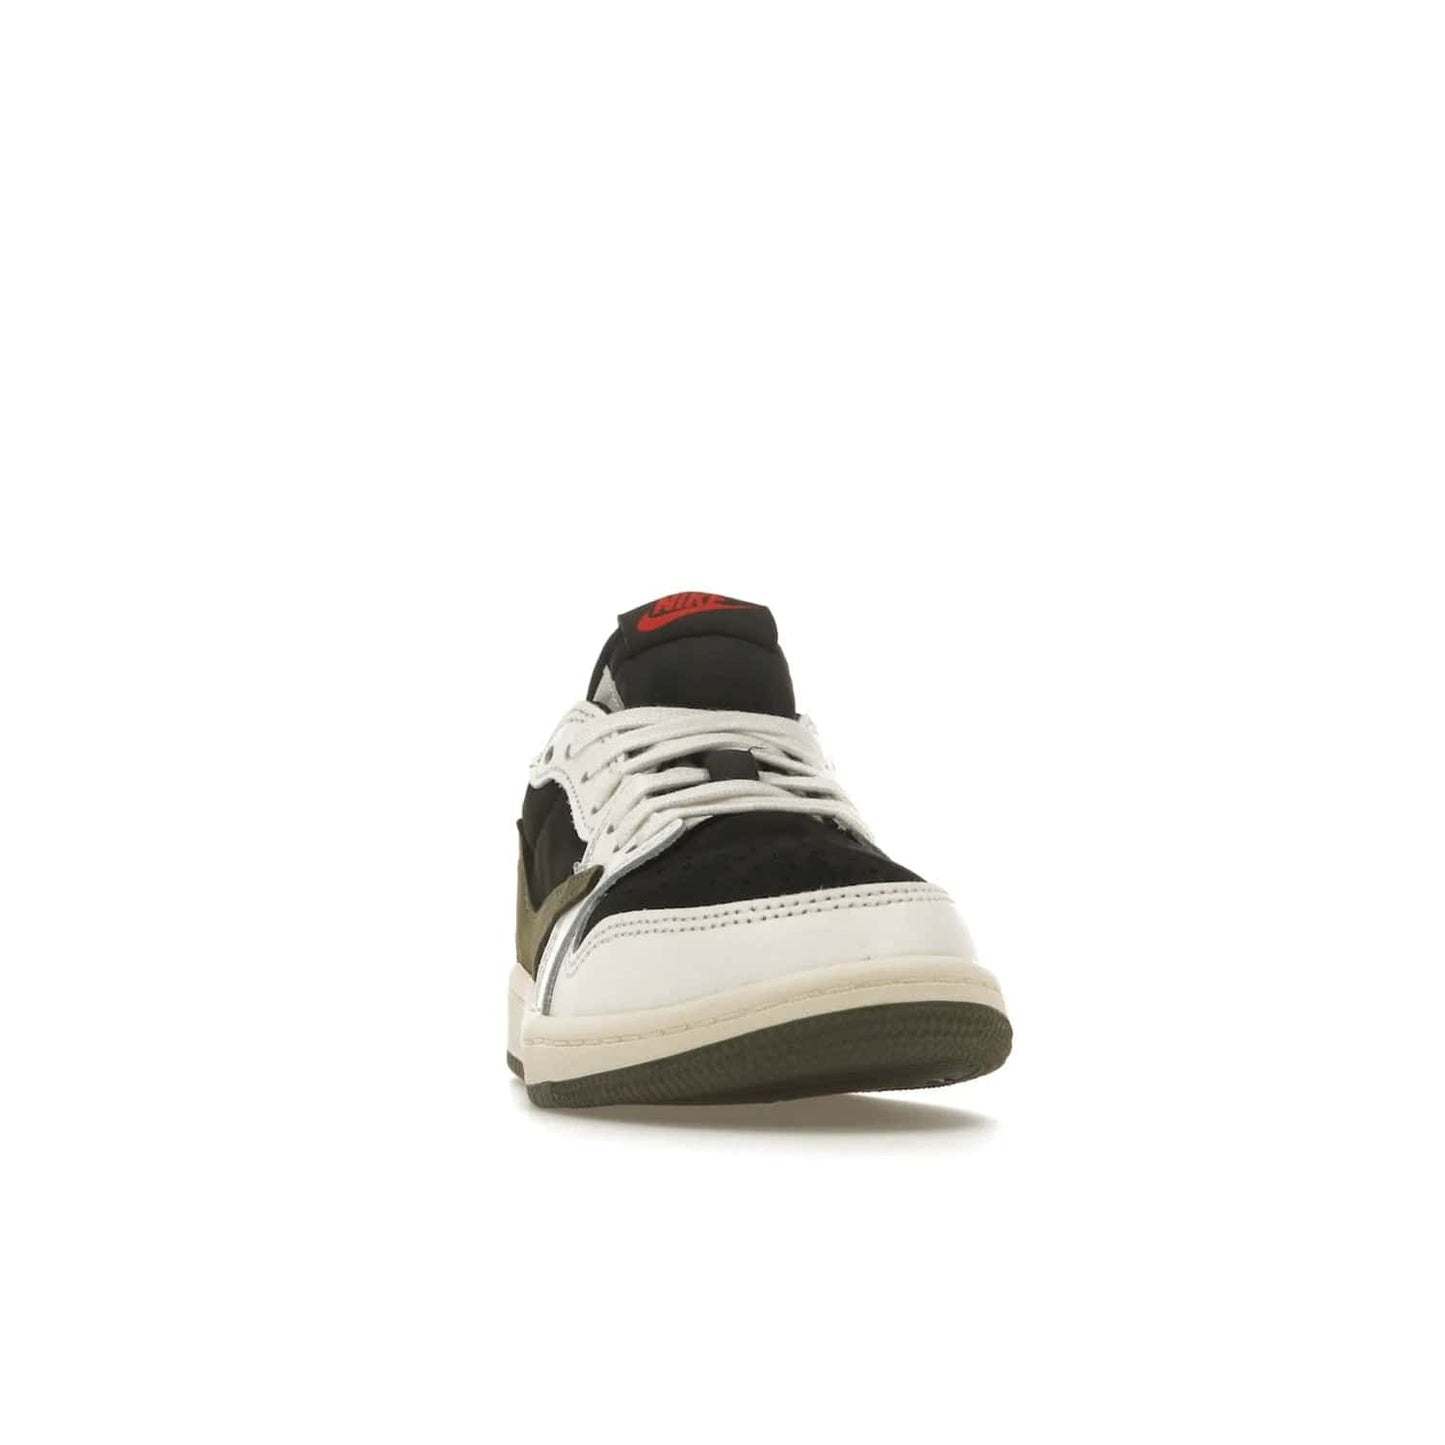 Jordan 1 Retro Low OG SP Travis Scott Olive (PS) - Image 9 - Only at www.BallersClubKickz.com - Jordan 1 Retro Low OG SP Travis Scott Olive: A Sail upper, Red and Black accents, and Olive midsole combine for a classic sneaker that is perfect for any style.